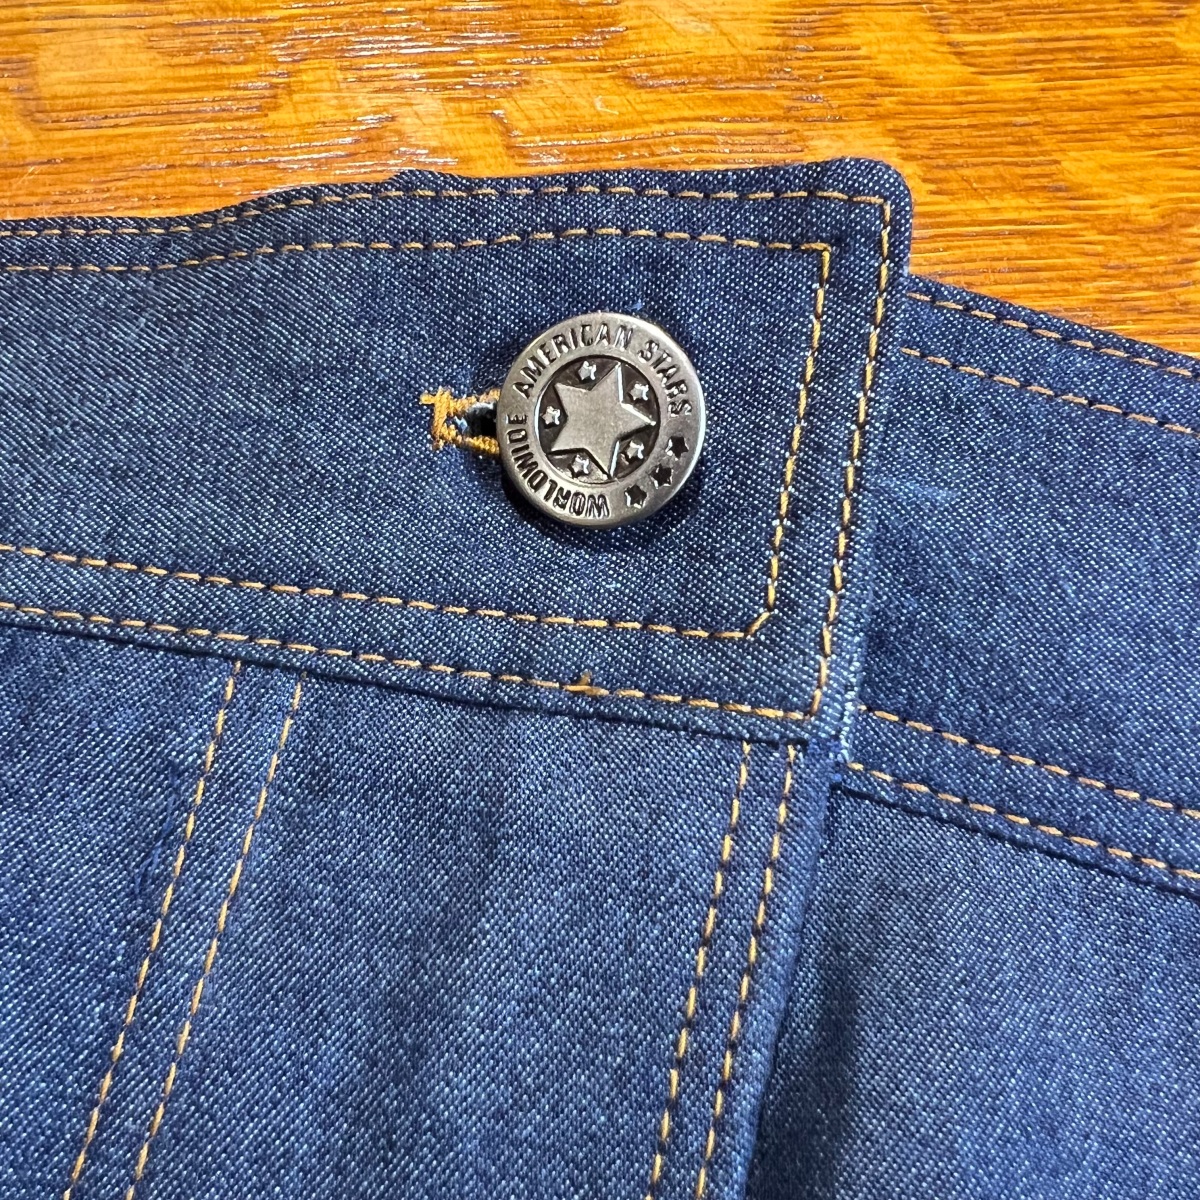 Vintage 80s Pants: Late 80s or early 90s -Lawman- Womens slightly faded  blue cotton denim highwaisted denim jeans pants with zipper fly closure  with button. Front scoop pockets and no rear pockets.